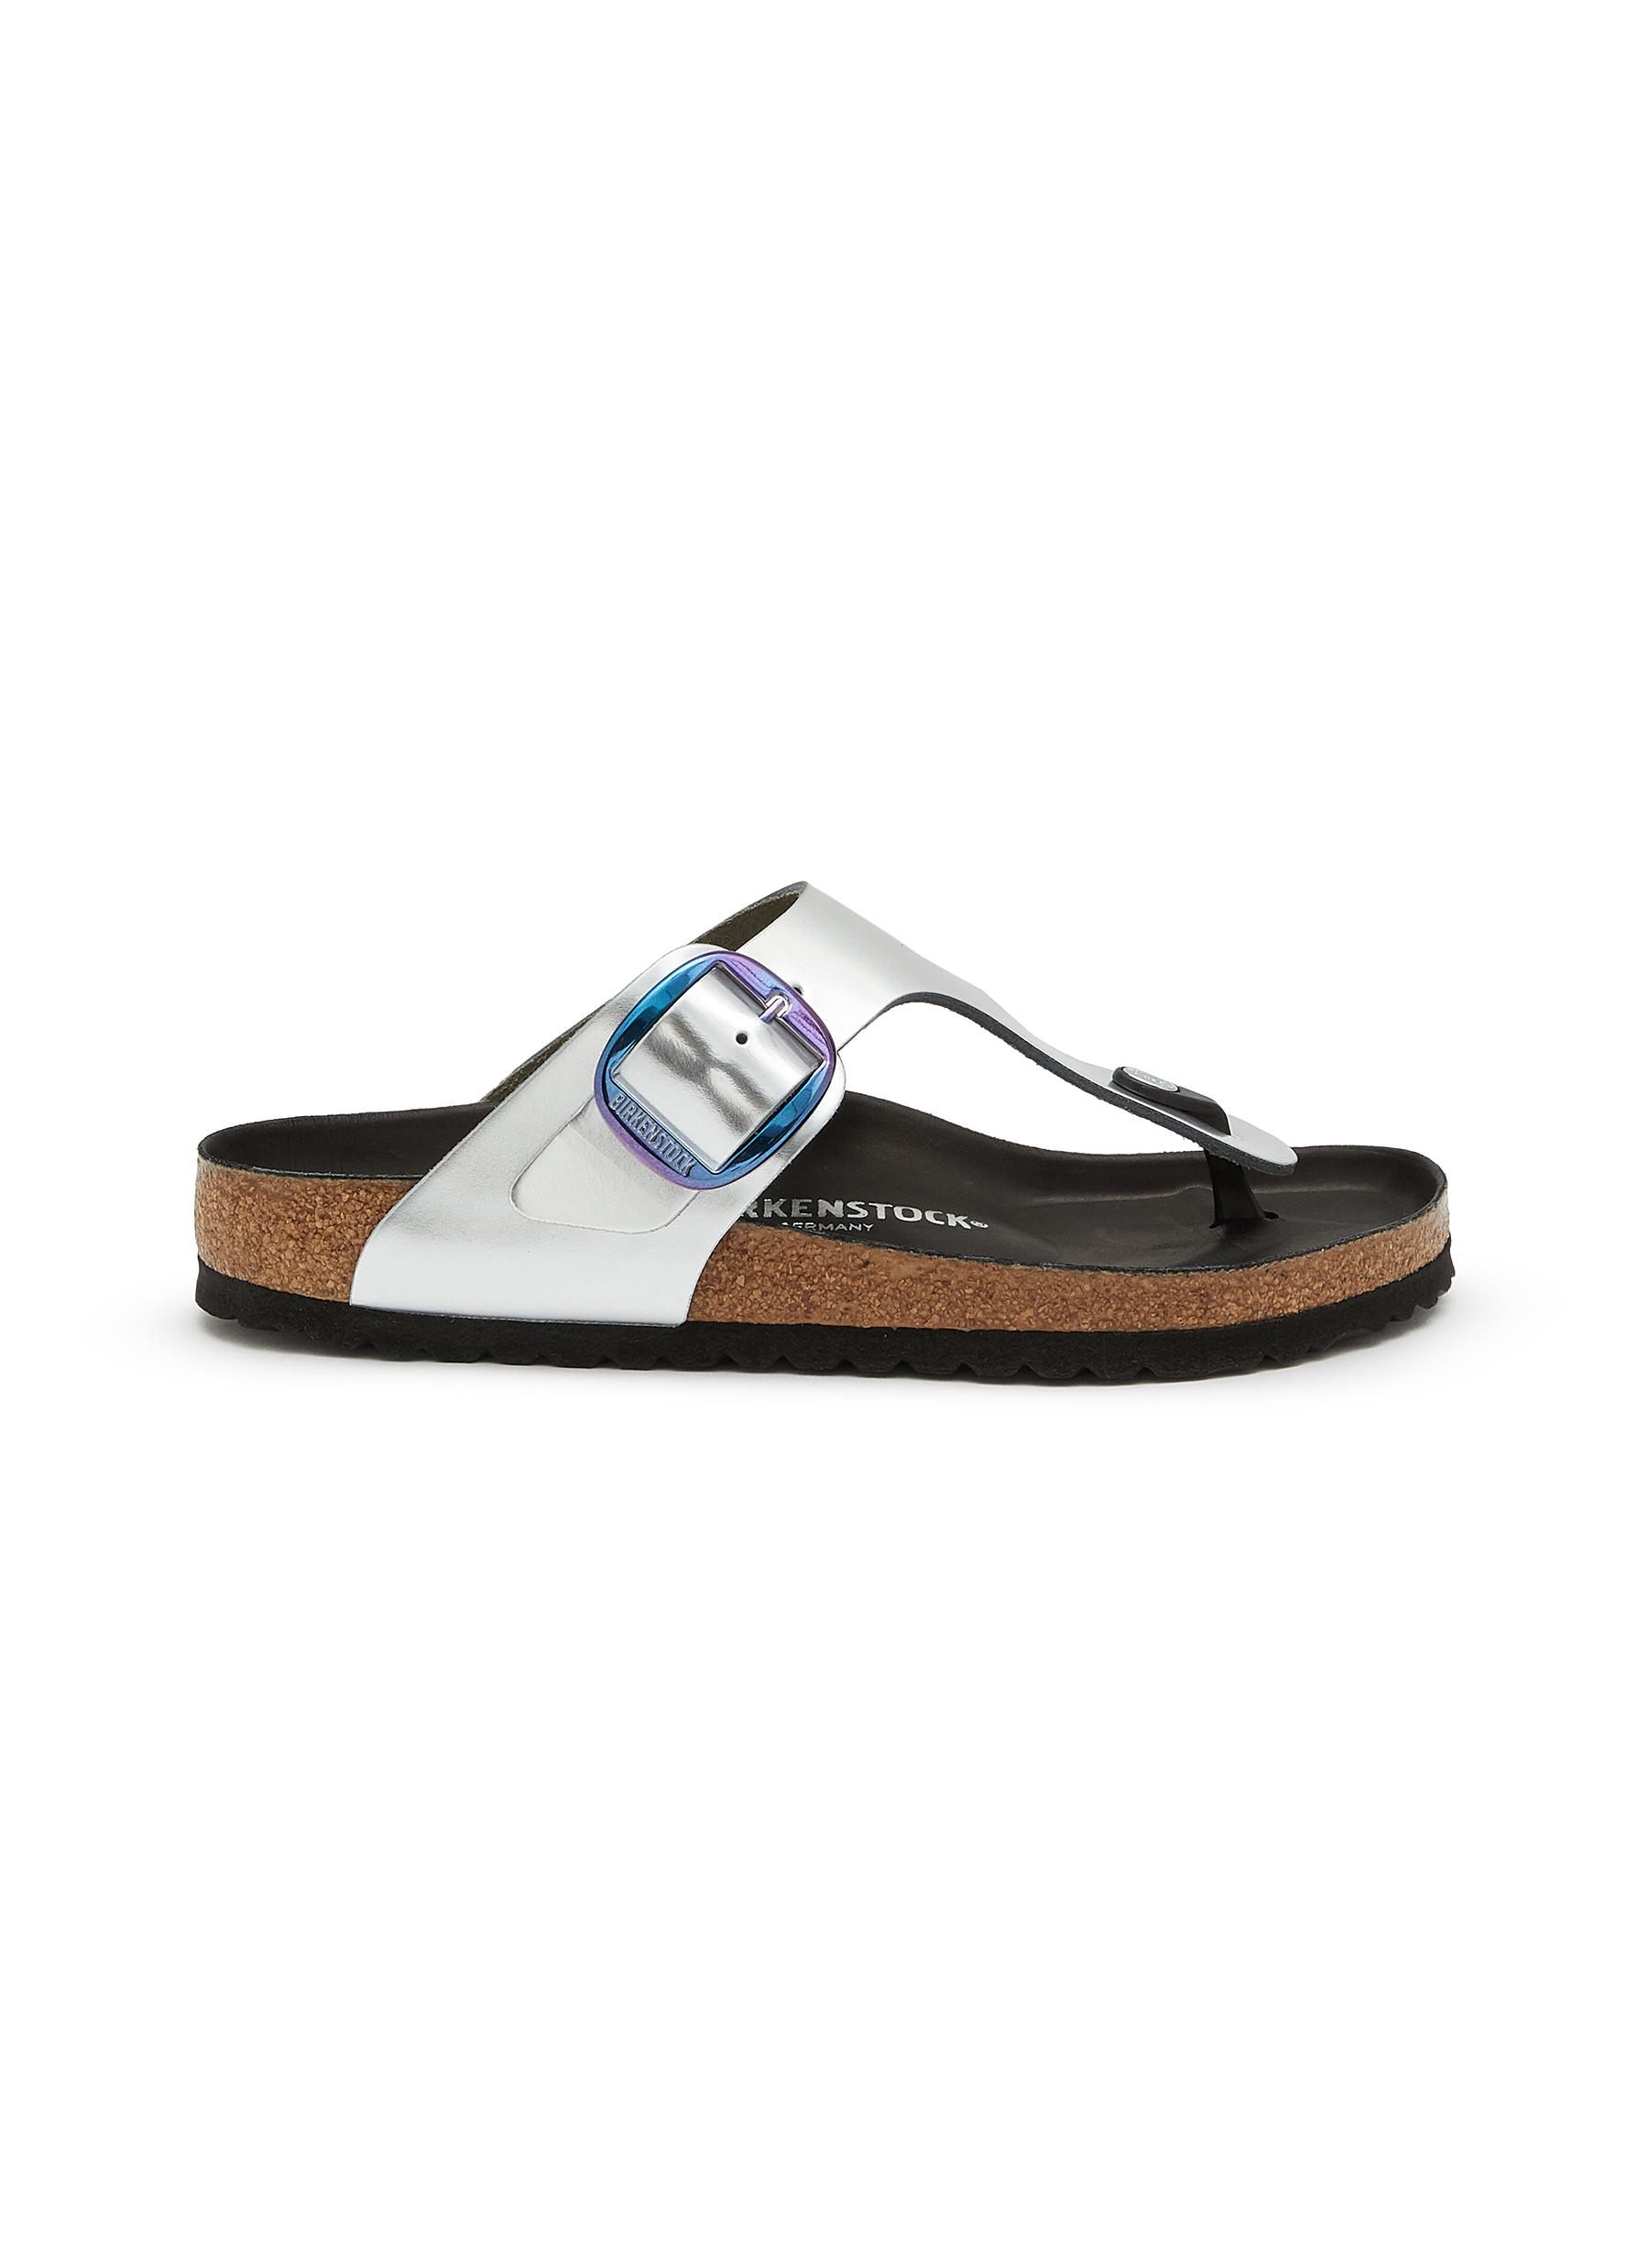 Gizeh Leather Thong Sandals